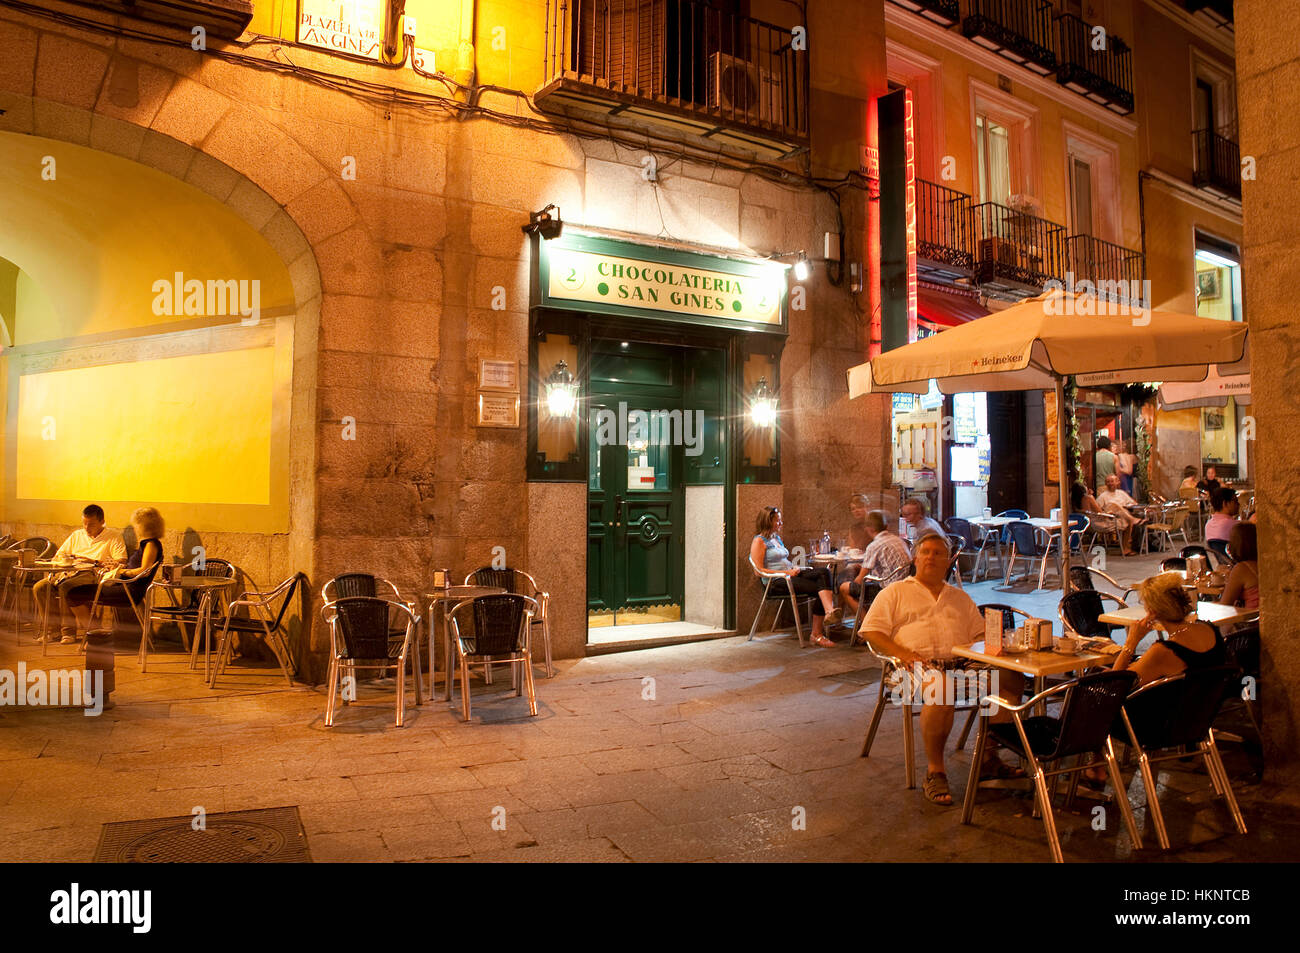 People sitting on the Chocolatería San Gines terrace, night view. Madrid. Spain. Stock Photo